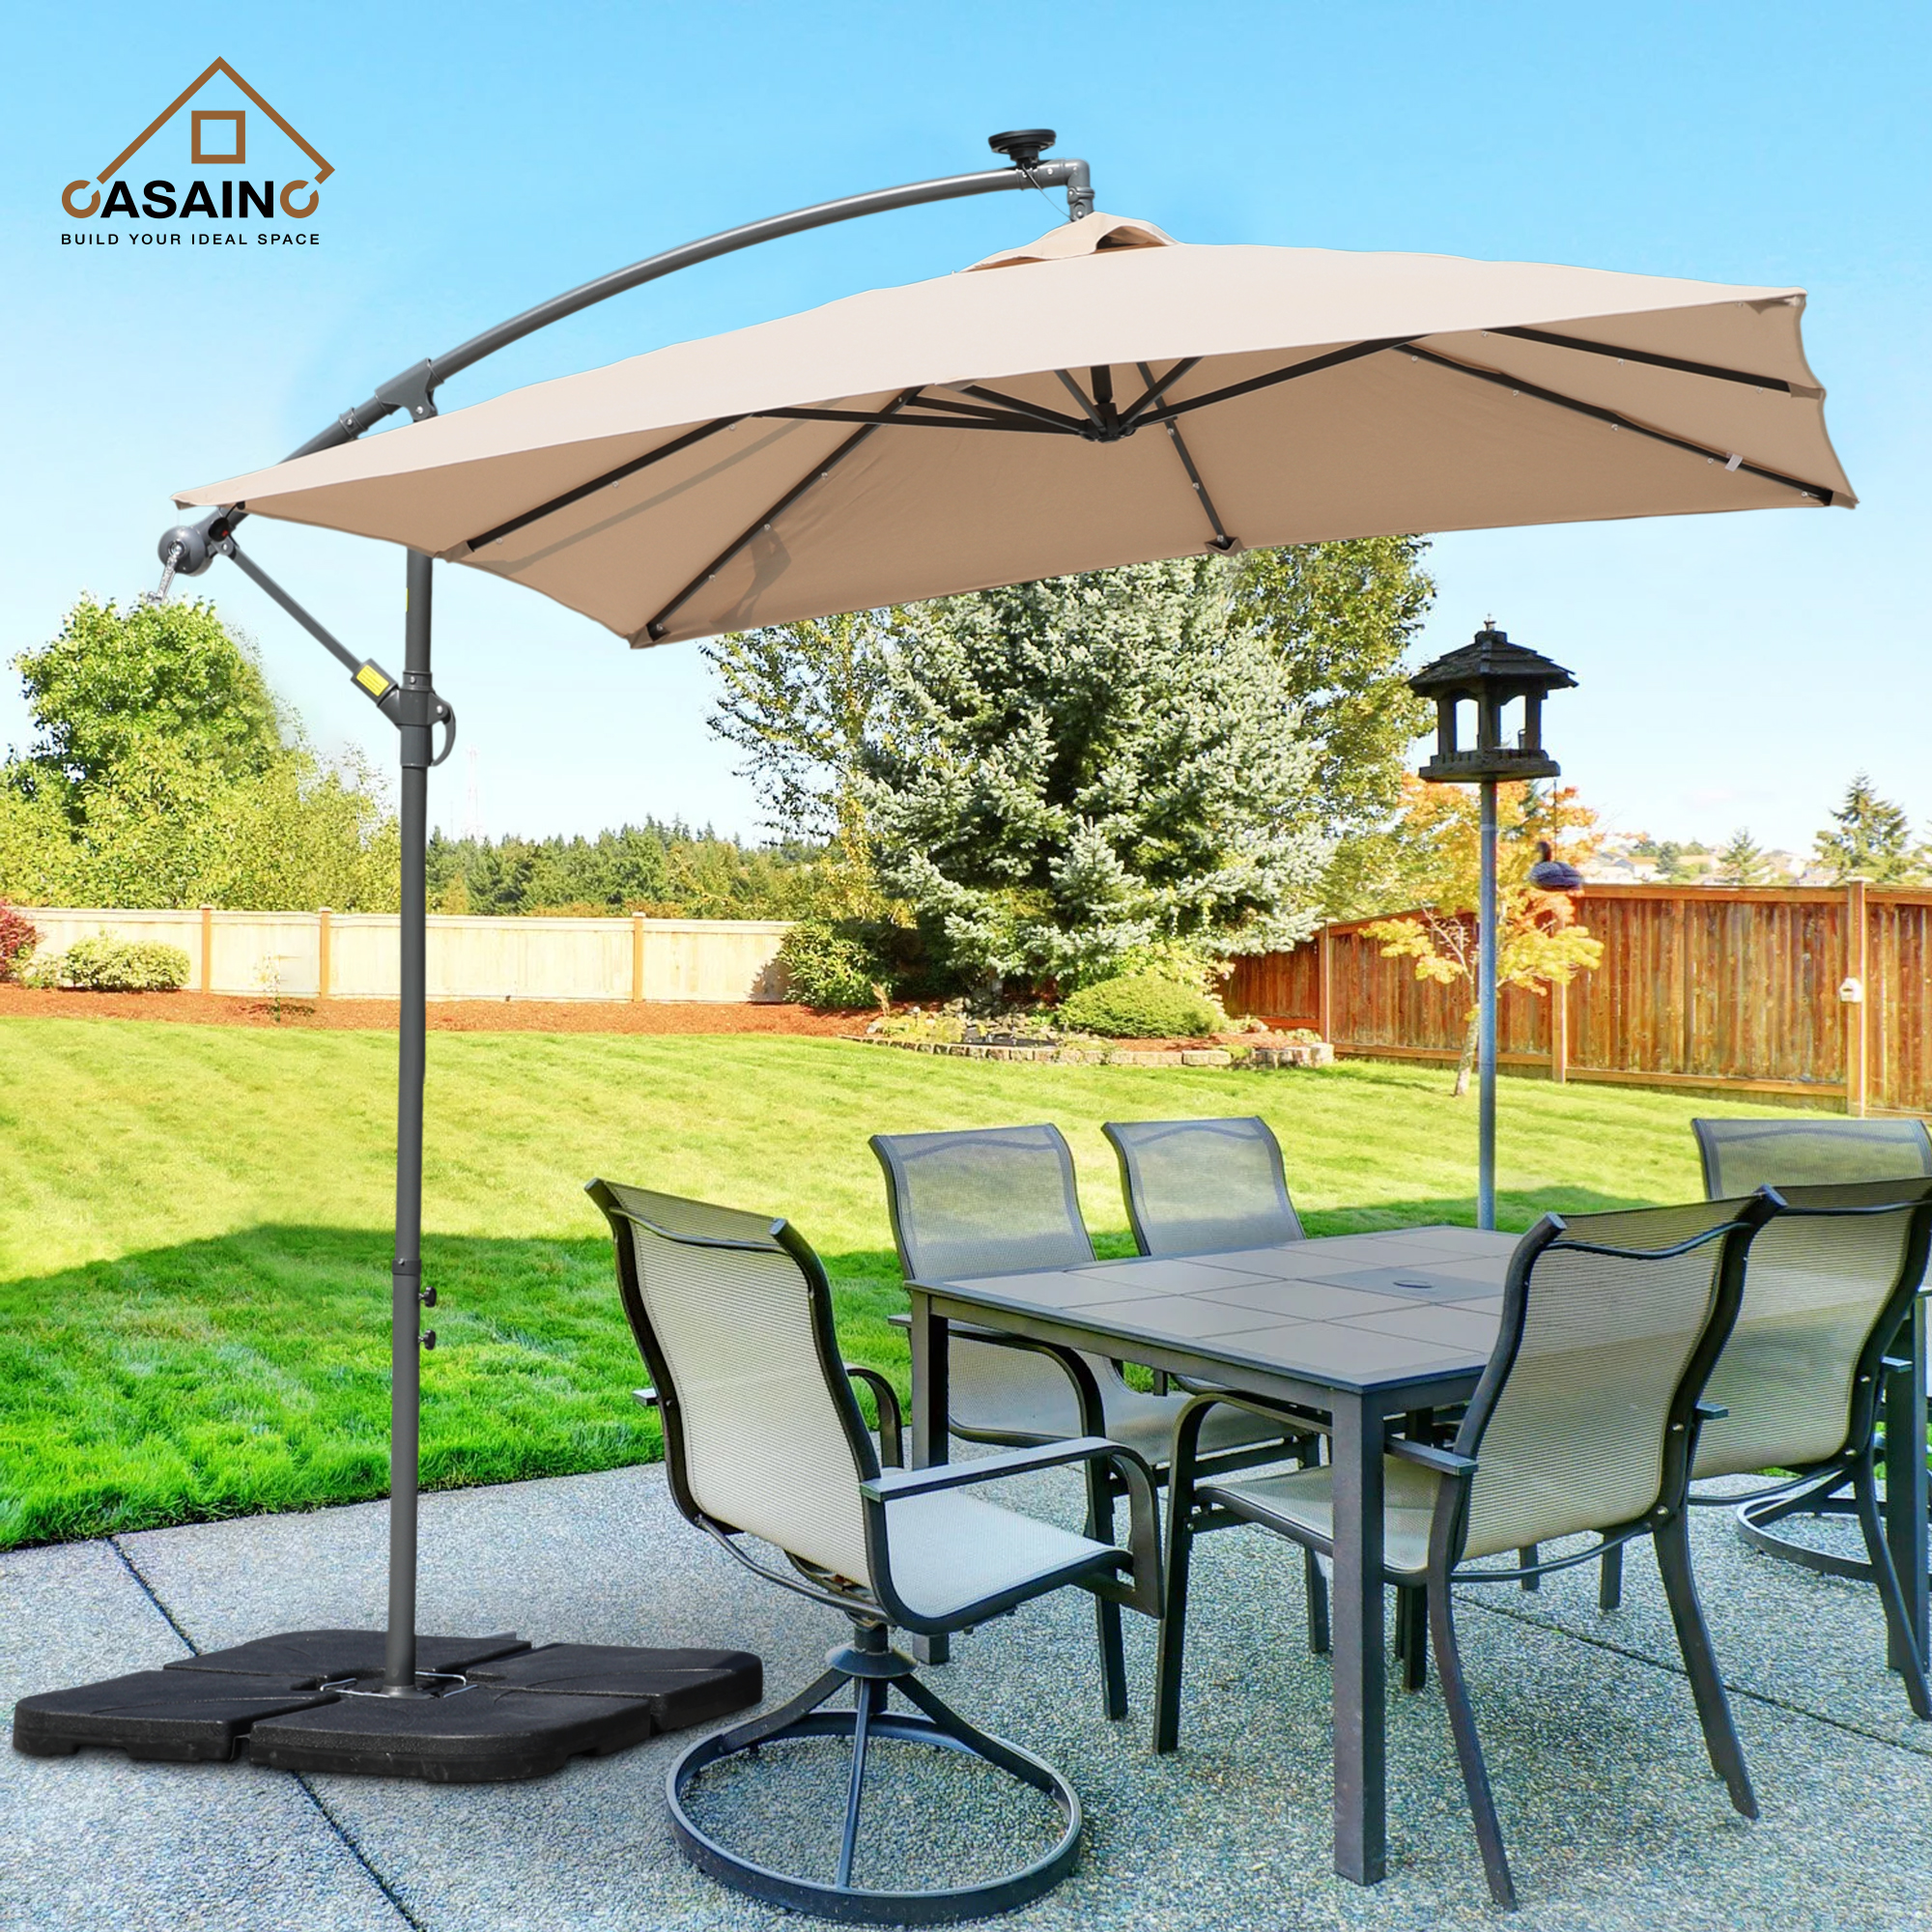 8.5Ft Square 32 LED Solar Lights Outdoor Market Cantilever Patio Umbrella with Aluminum Hanging Umbrella with Tilt and Base
cantilever umbrella